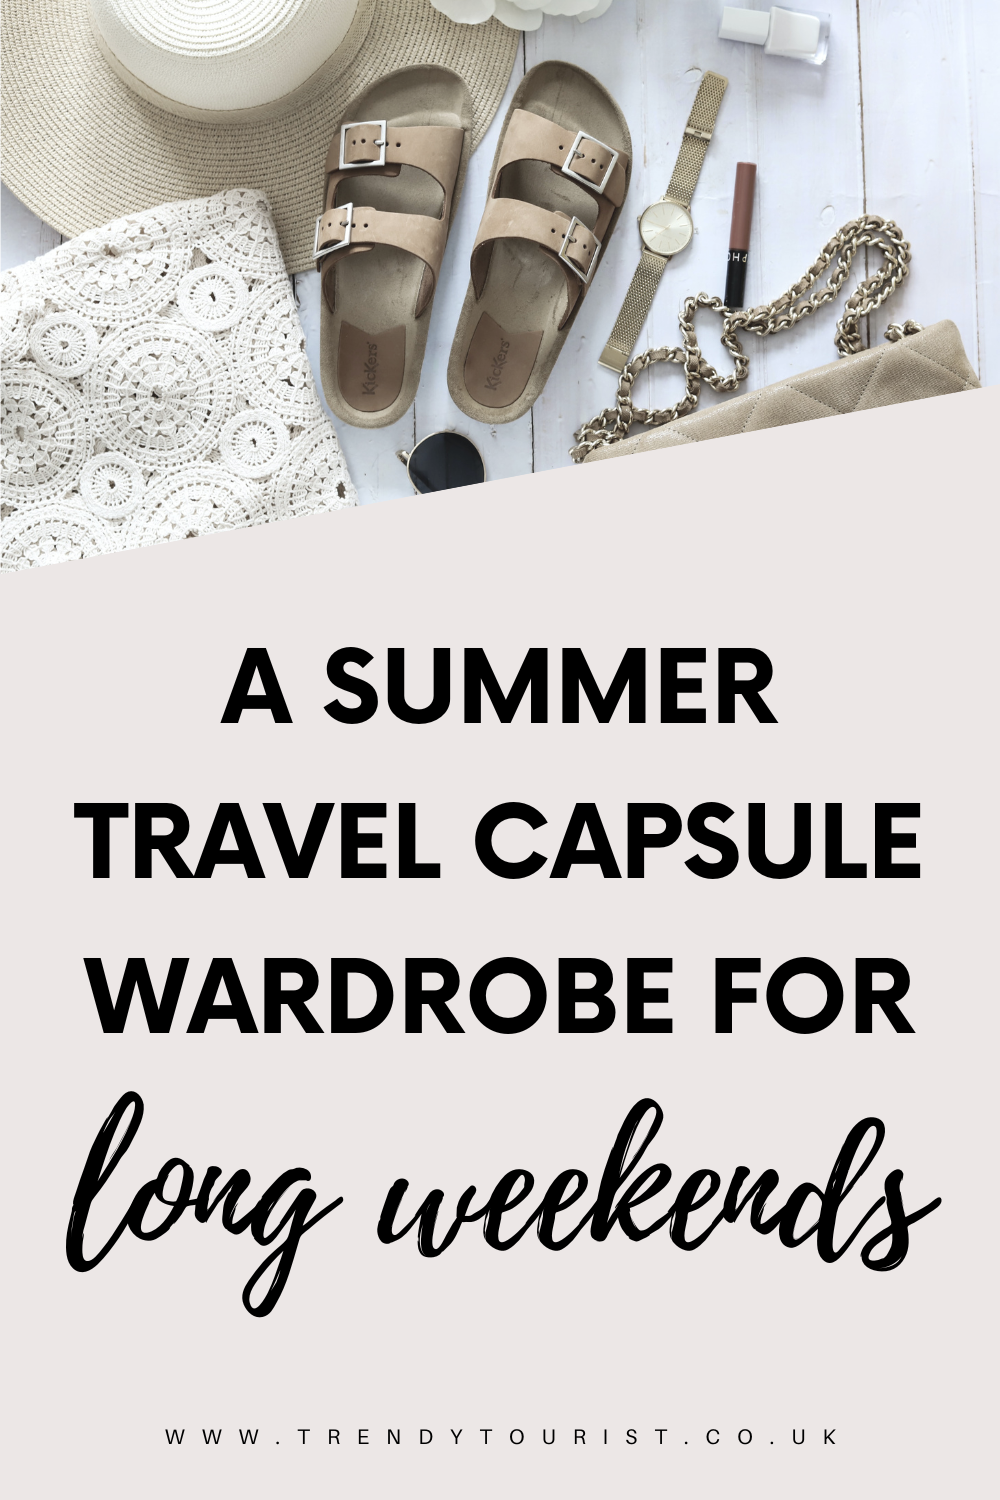 A Summer Travel Capsule Wardrobe for a Long Weekend Away